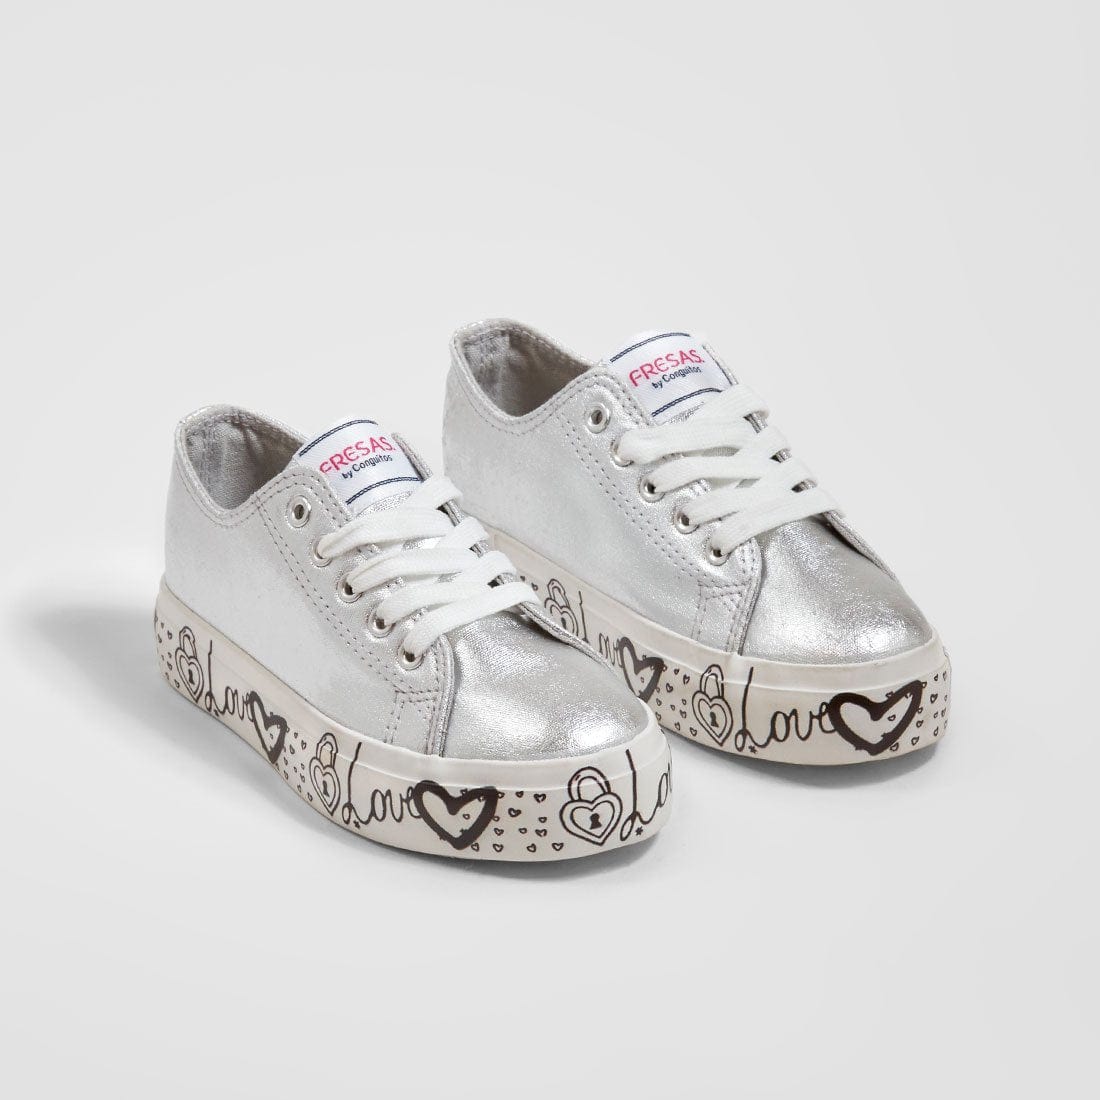 FRESAS CON NATA Shoes Girl's Silver Printed Canvas Slippers